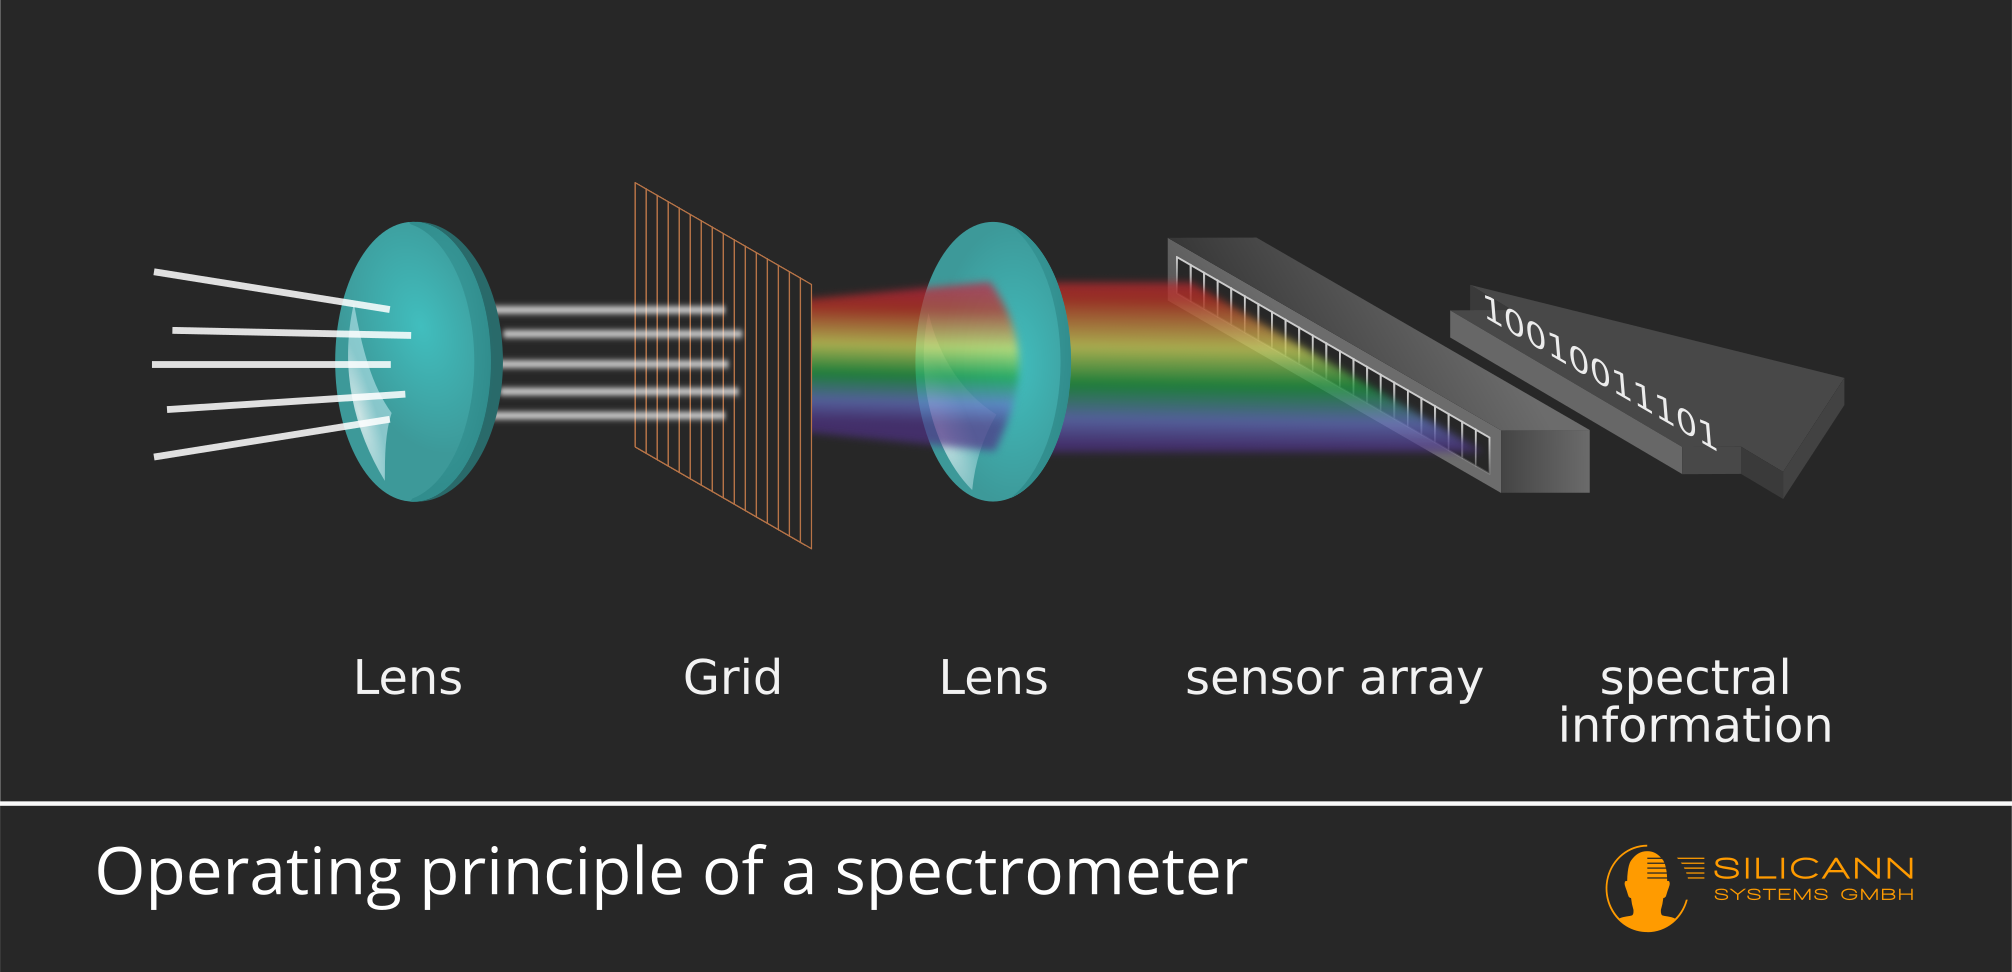 Spectral resolution explained